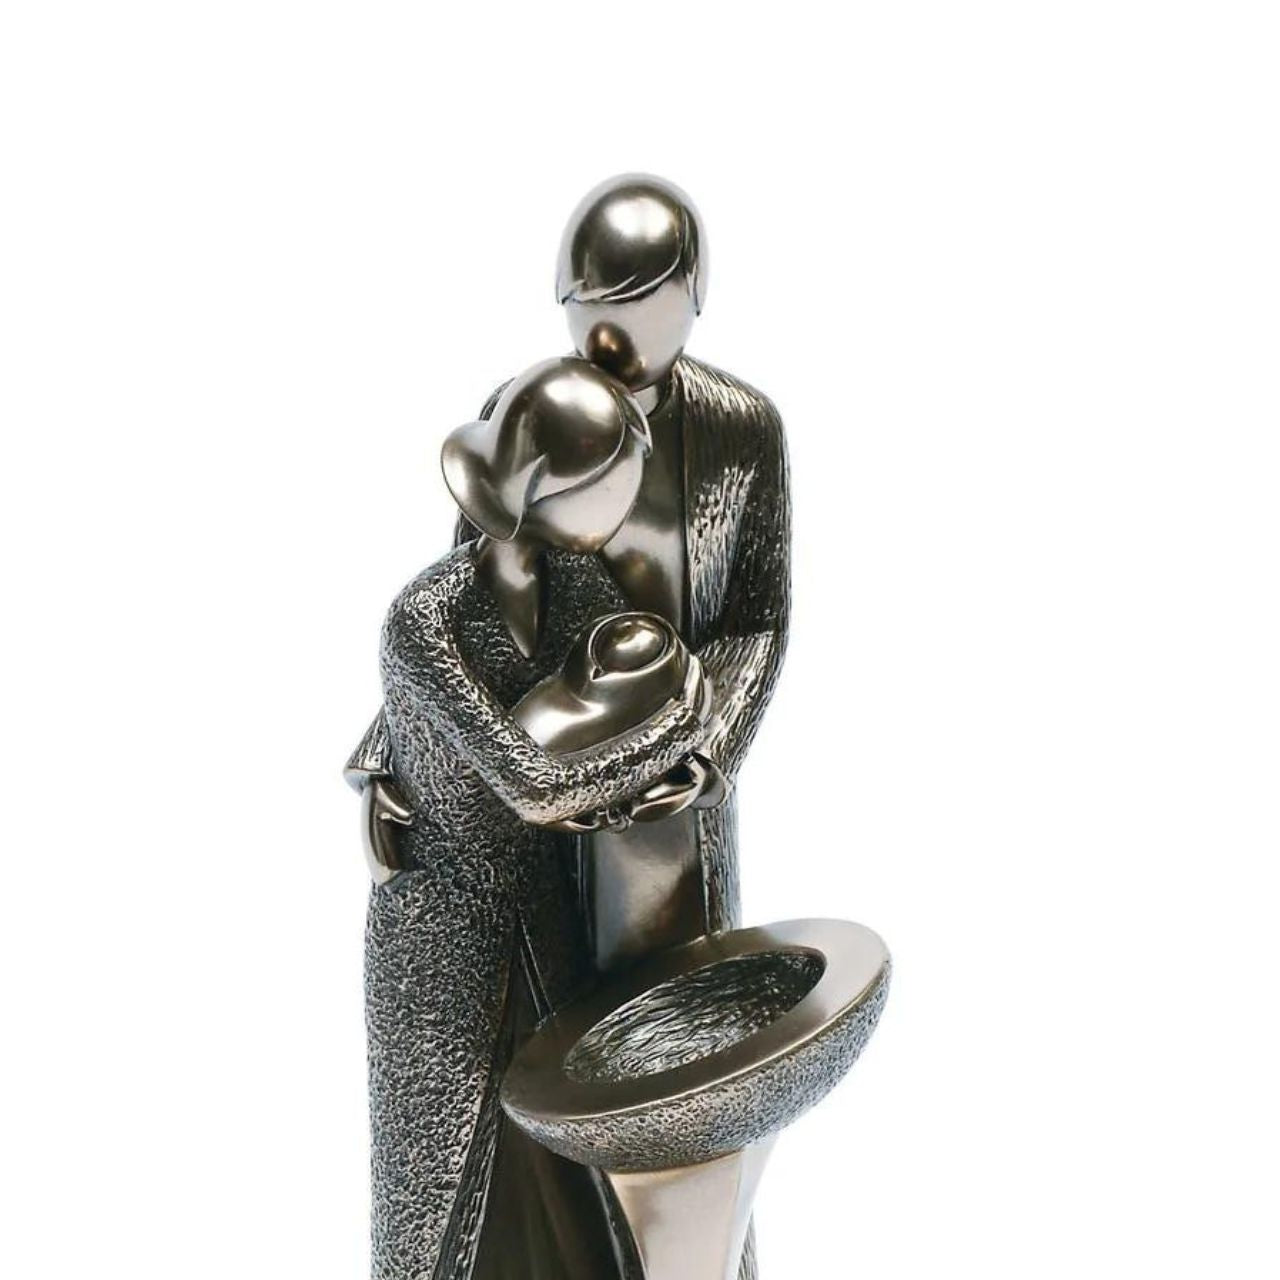 The Christening by Genesis  Exquisitely hand finished in its detail, it depicts in wonderful detail the magic and unity of love.   Genesis Fine Arts has evolved into a much loved and world famous Irish brand to produce a striking range of handcrafted cold cast bronze sculptures.